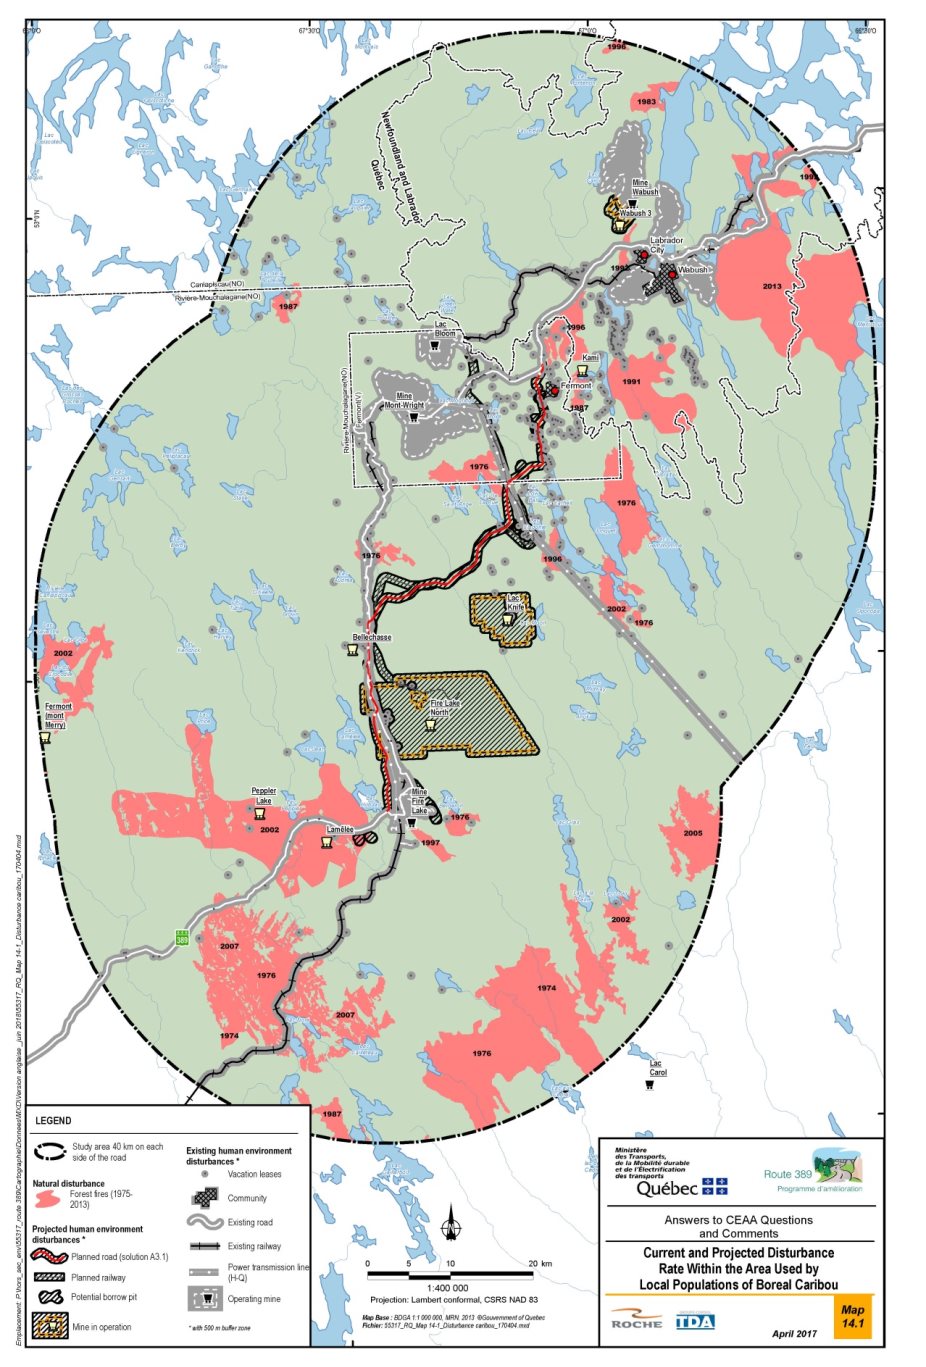 Figure 20: Existing and projected disturbance levels in the area used by local boreal caribou populations